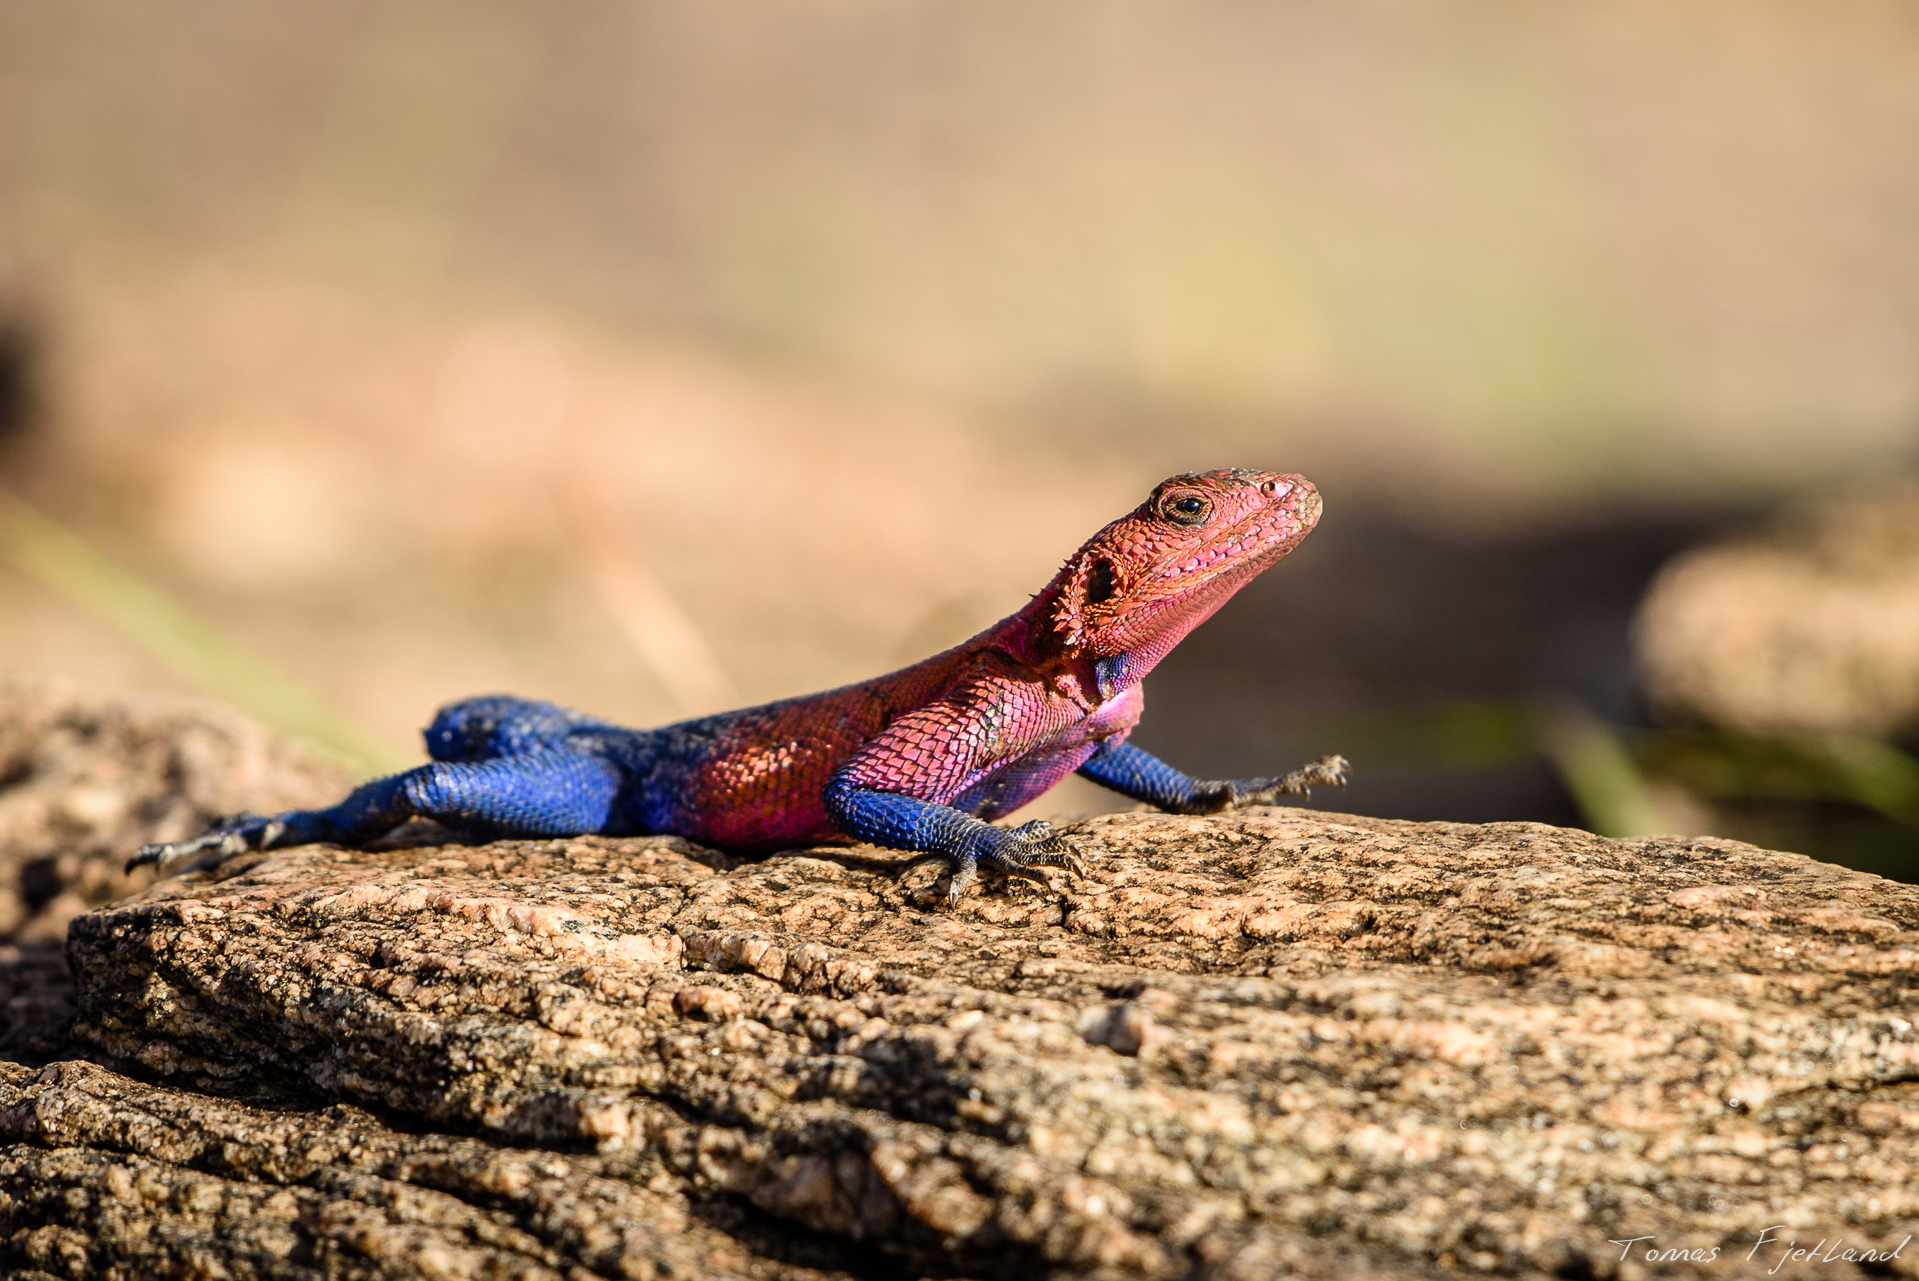 Well, I think it's a flat-headed rock agama, anyway